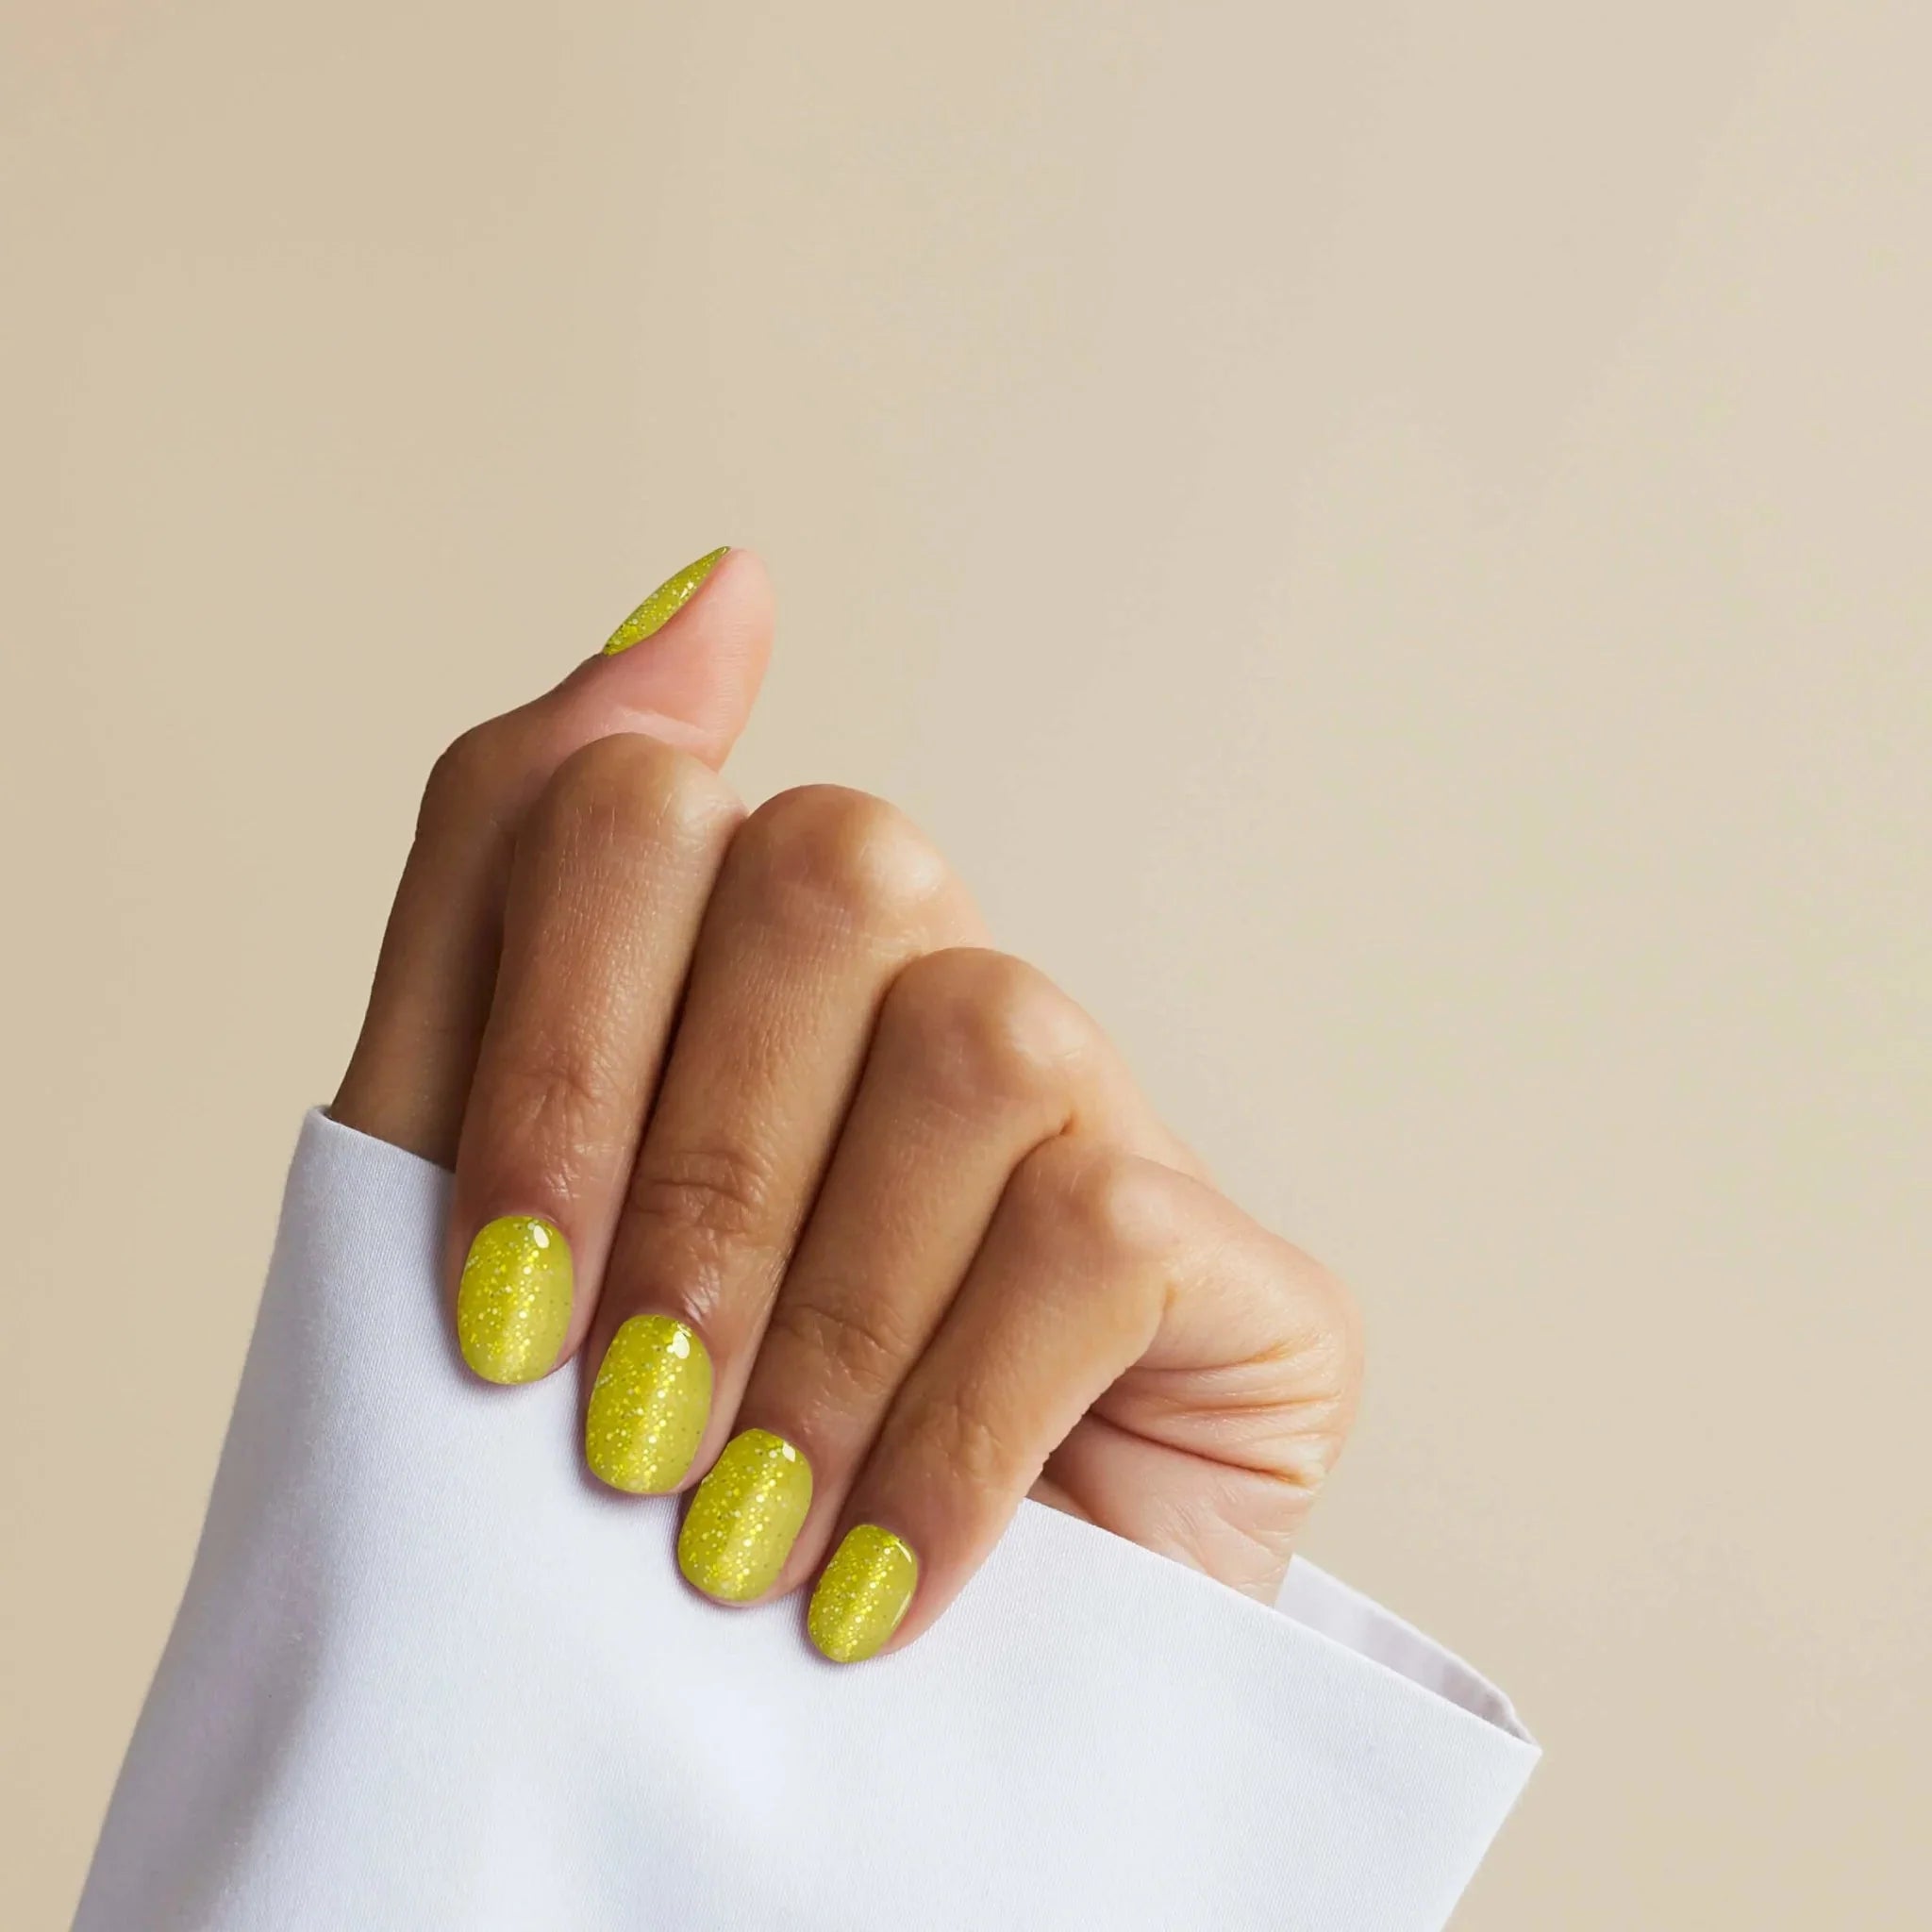 How To Fix Yellow And Stained Nails - L'Oréal Paris